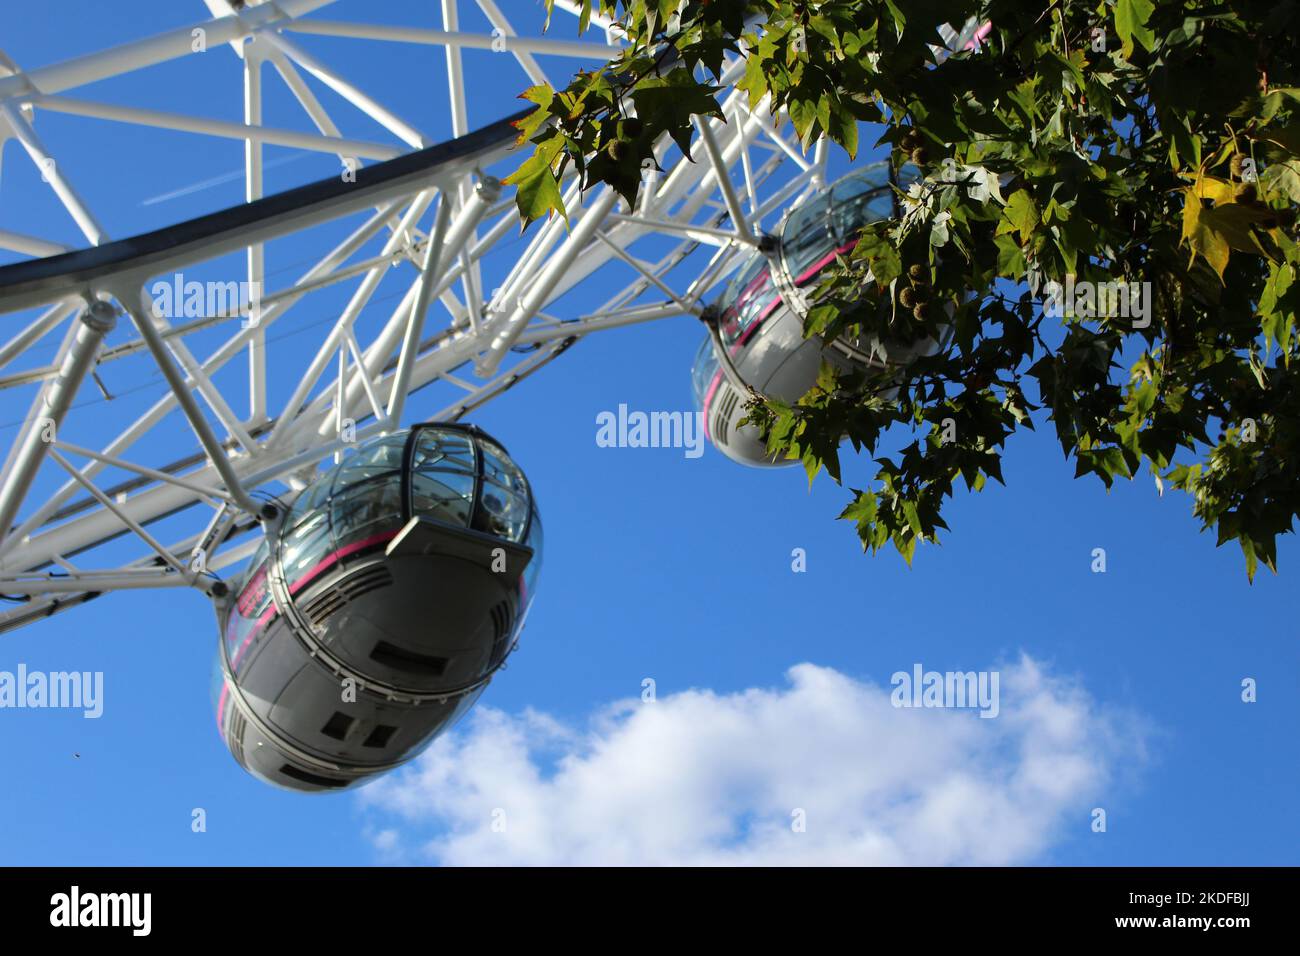 Tourists enjoy the Millennium Wheel on a sunny day. Close up picture of the carriages on the London Eye with greenery and blue sky background. Stock Photo